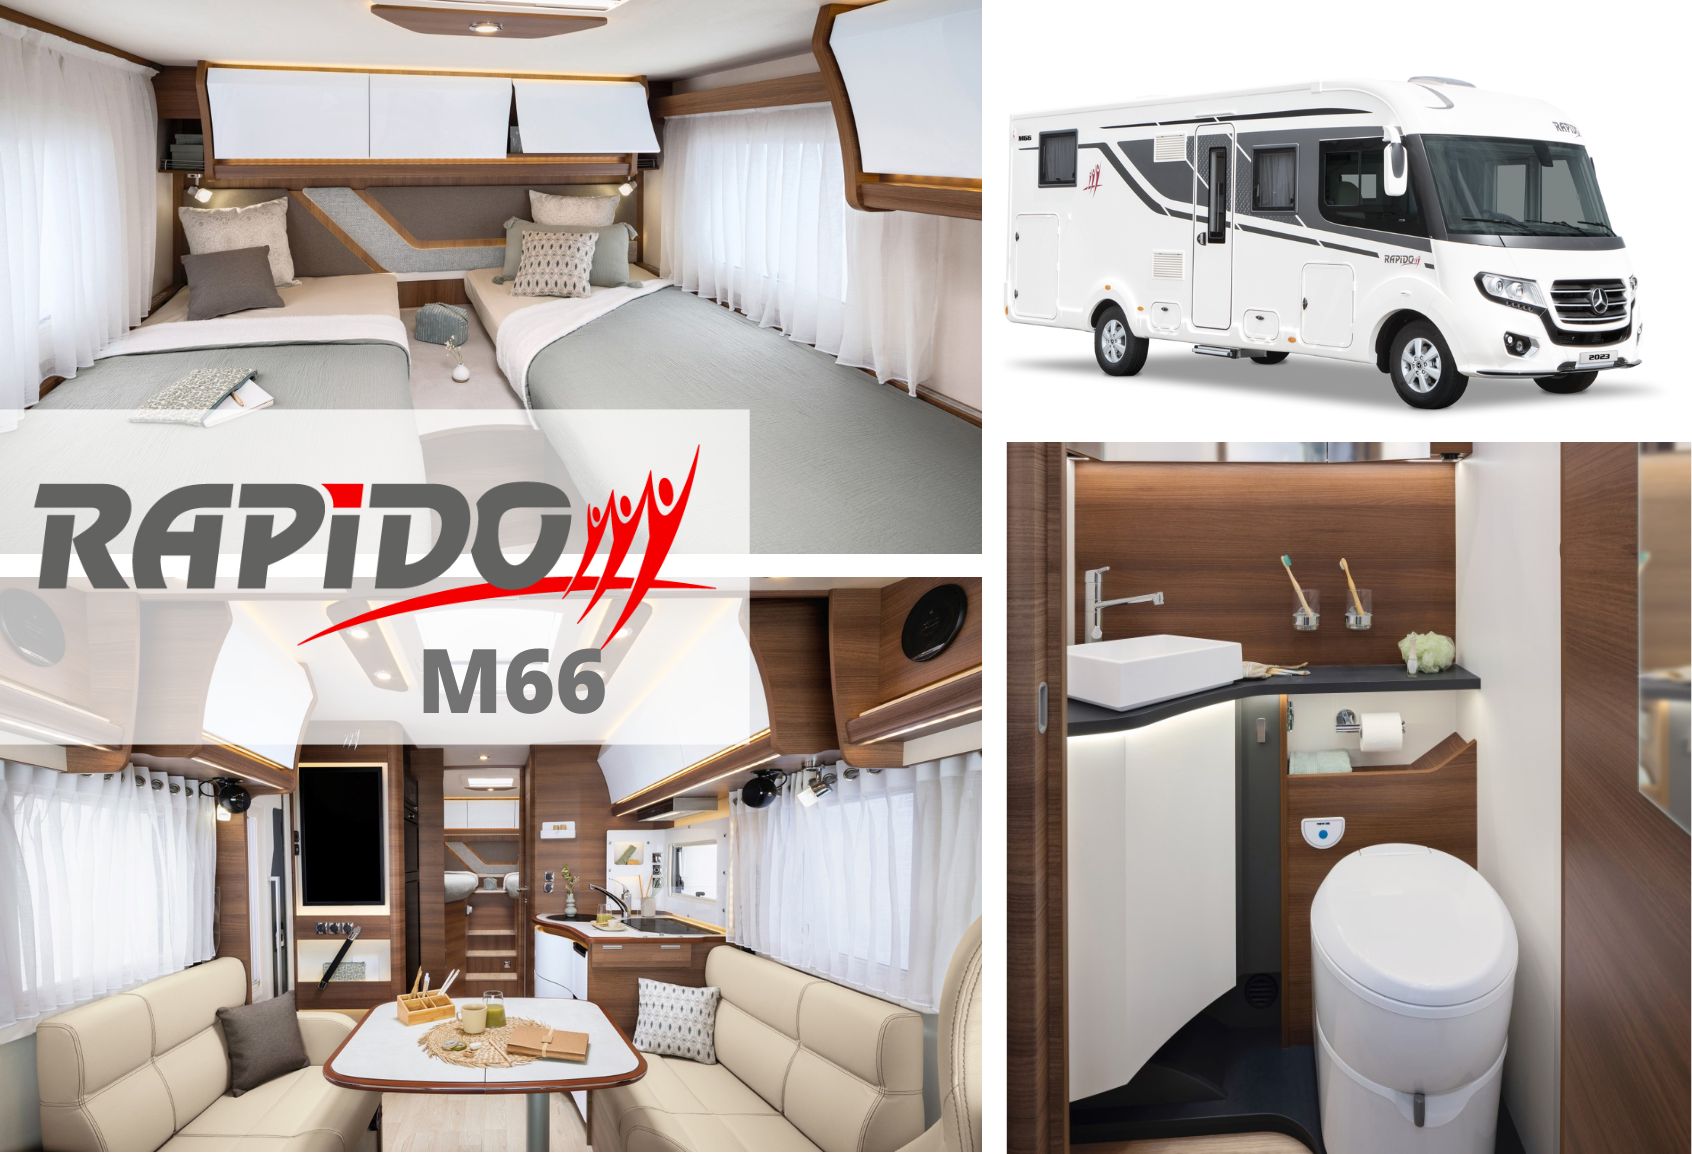 Motorhome Rapido M66 based on Mercedes - innovation and charm – main image